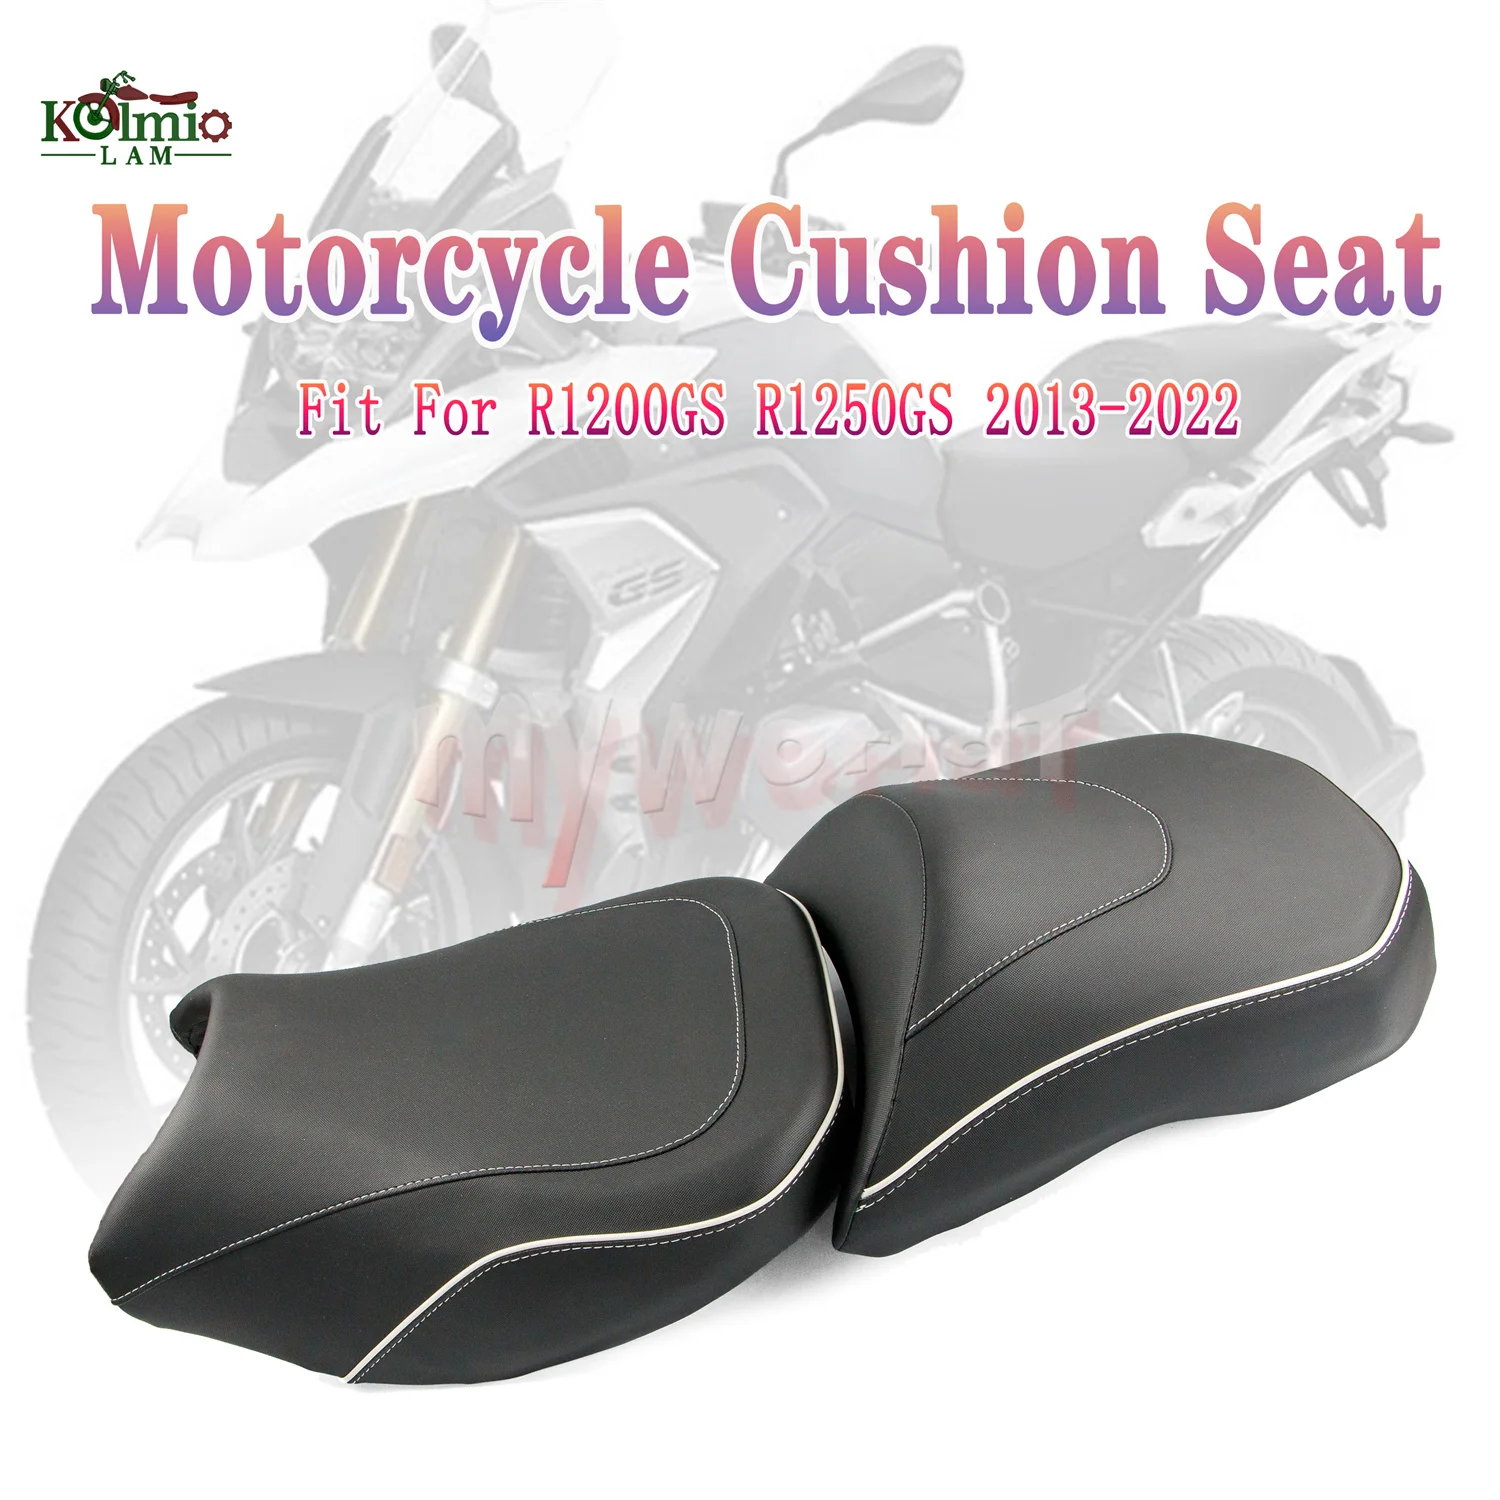 

Fit For Motorcycle BMW R1200GS R1250GS Adventure 2013 - 2022 Motorcyclist Front Rear Seat Pillion Cushion GSA R1200 R1250 GS